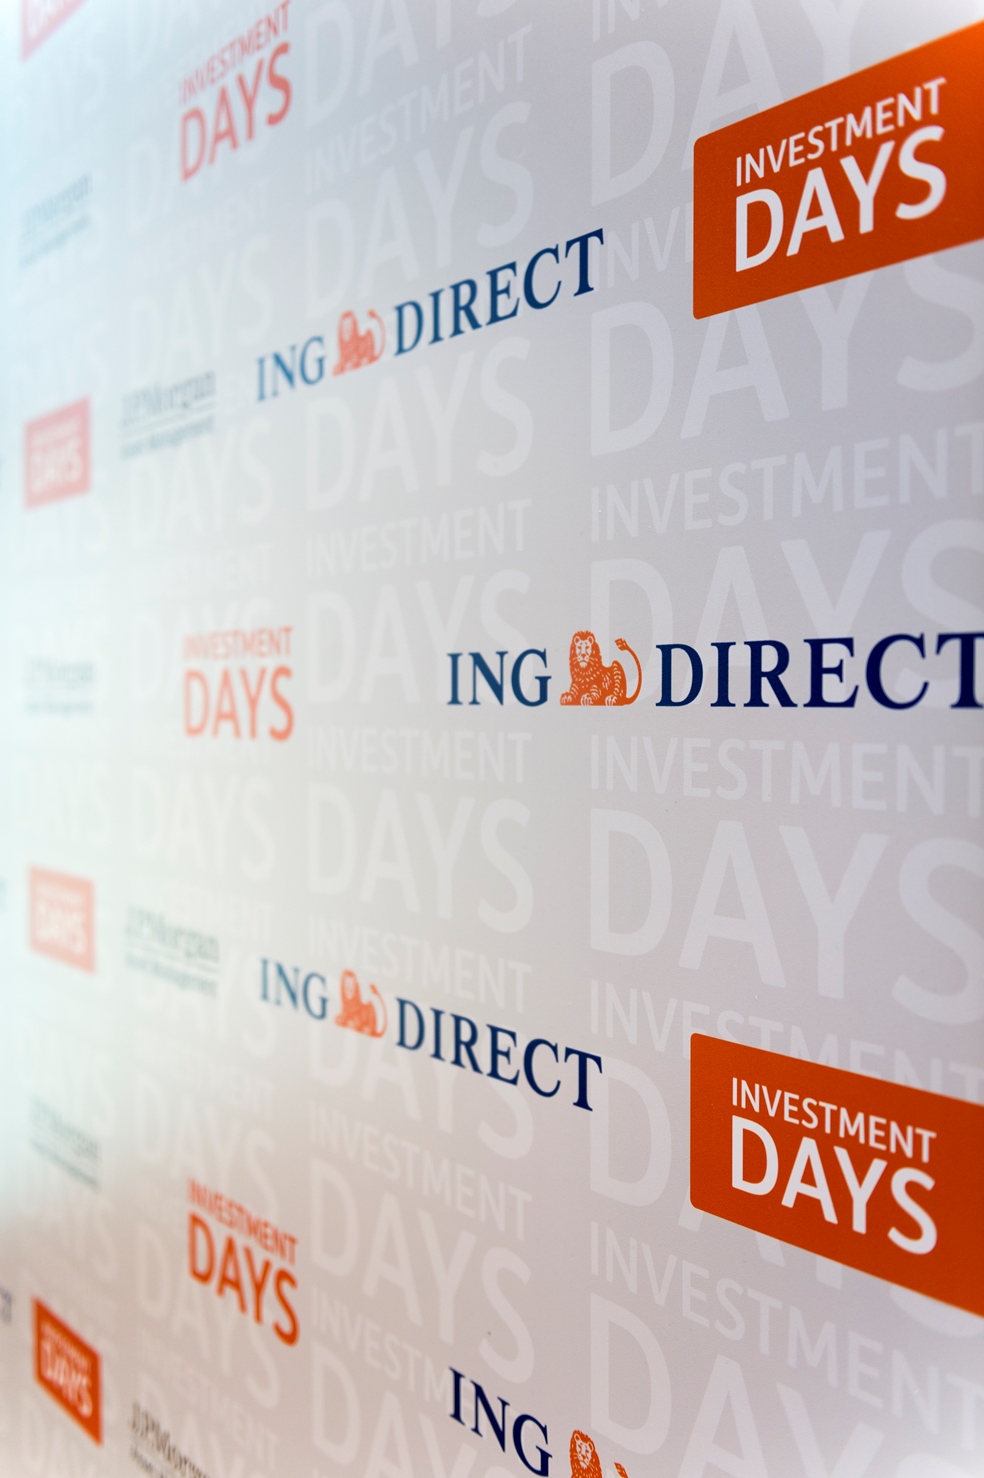 Investment Day in ING